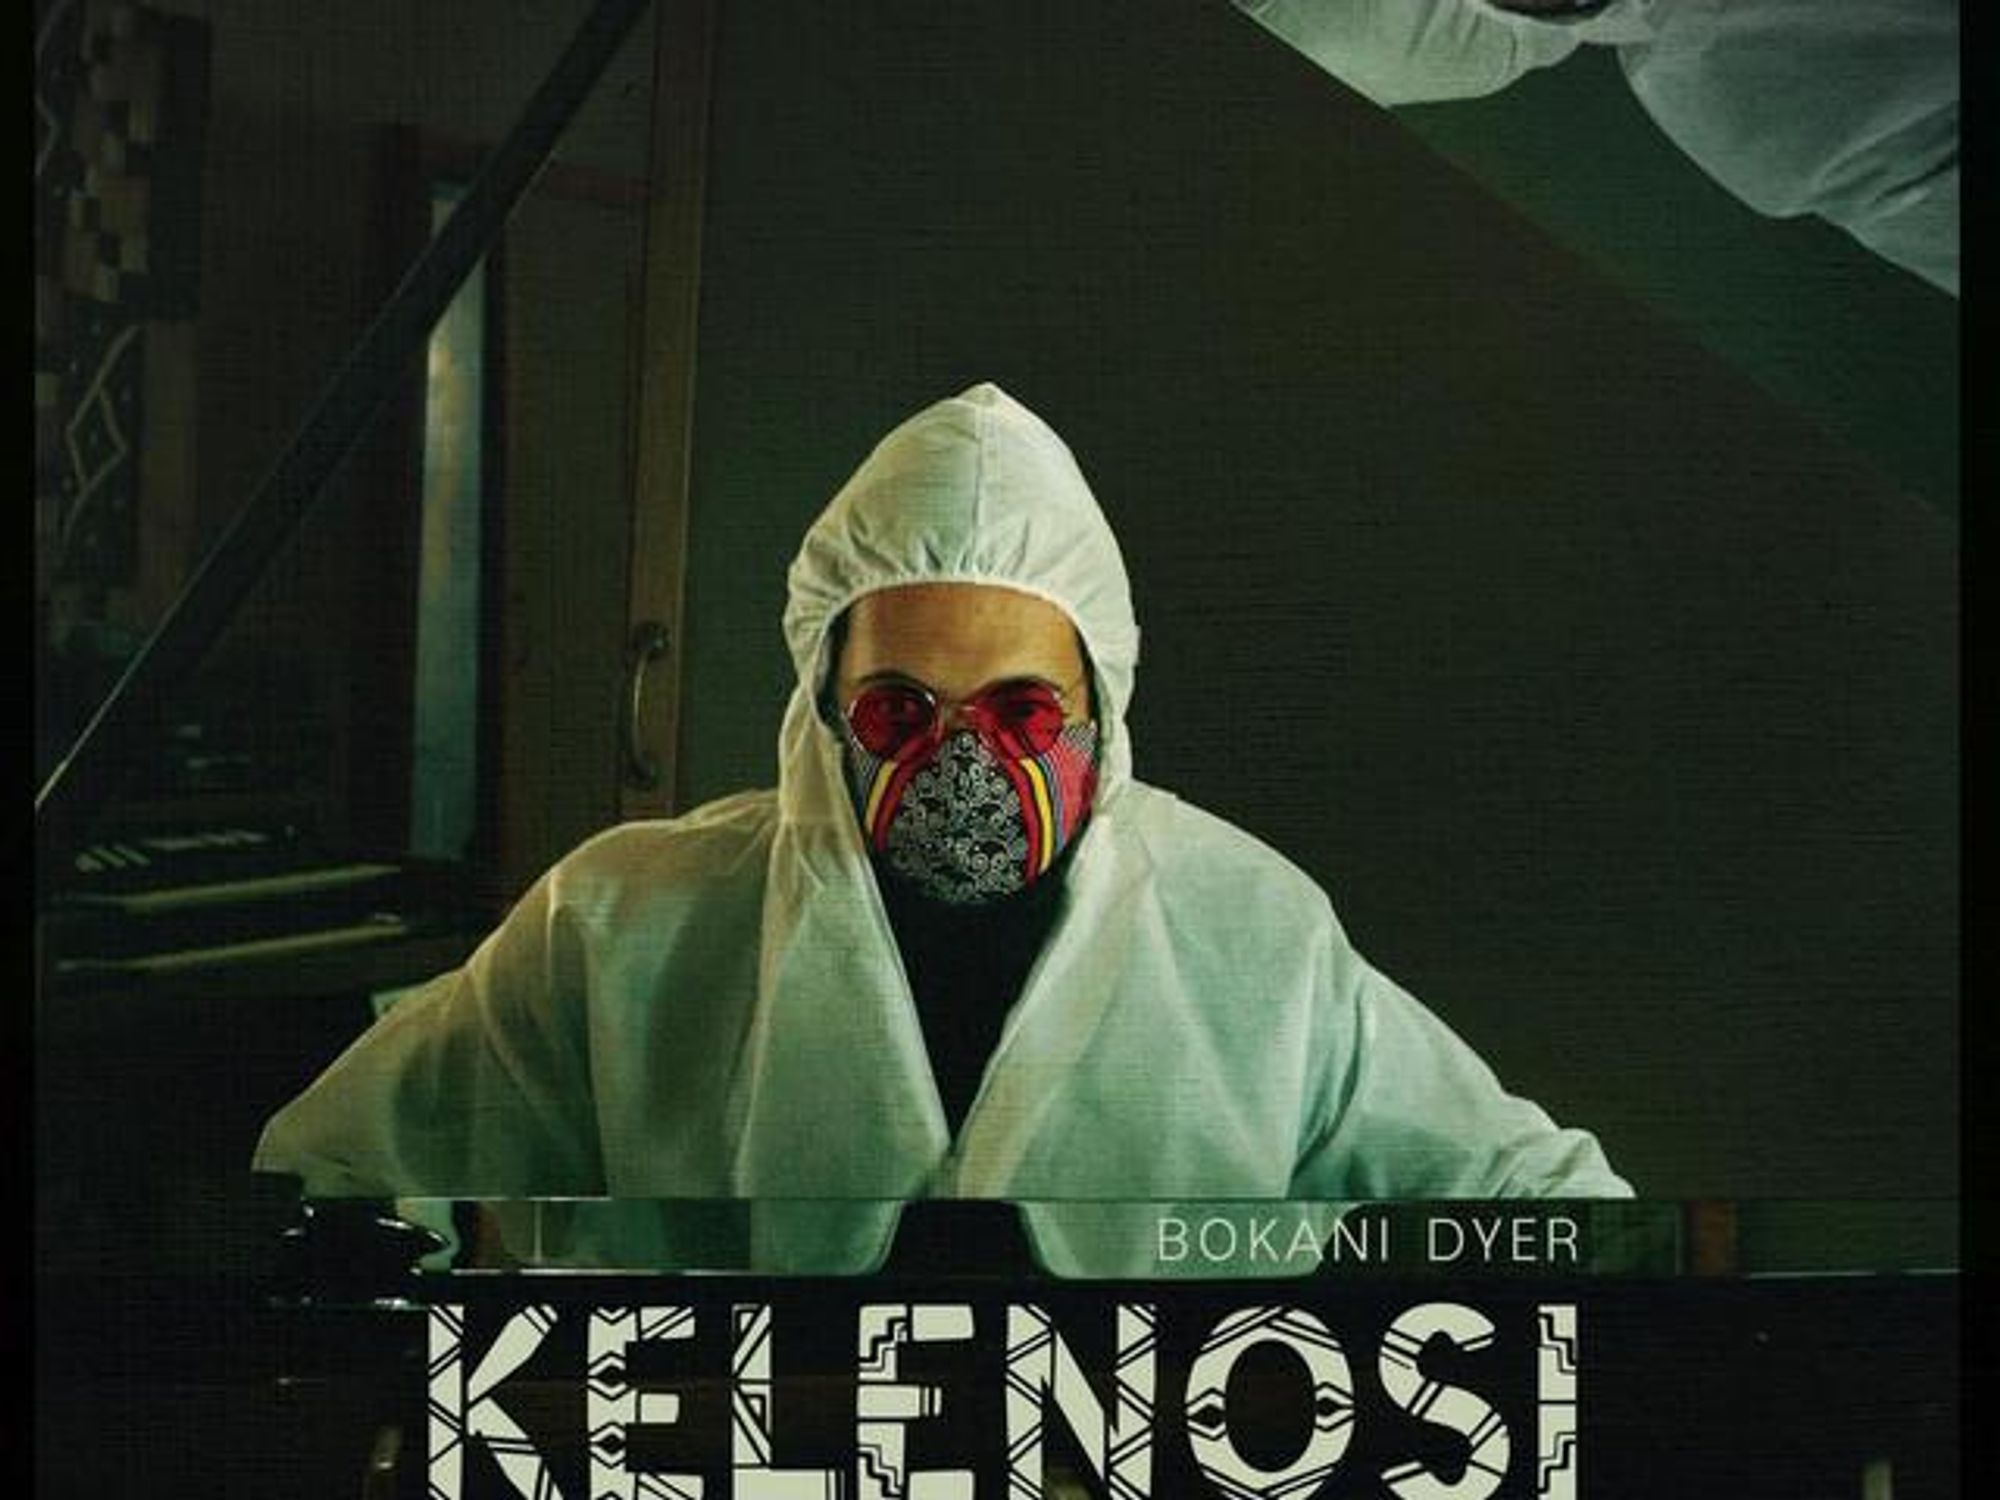 Interview: Bokani Dyer Plays Across Genres Without Compromise in New Album ‘Kelenosi’